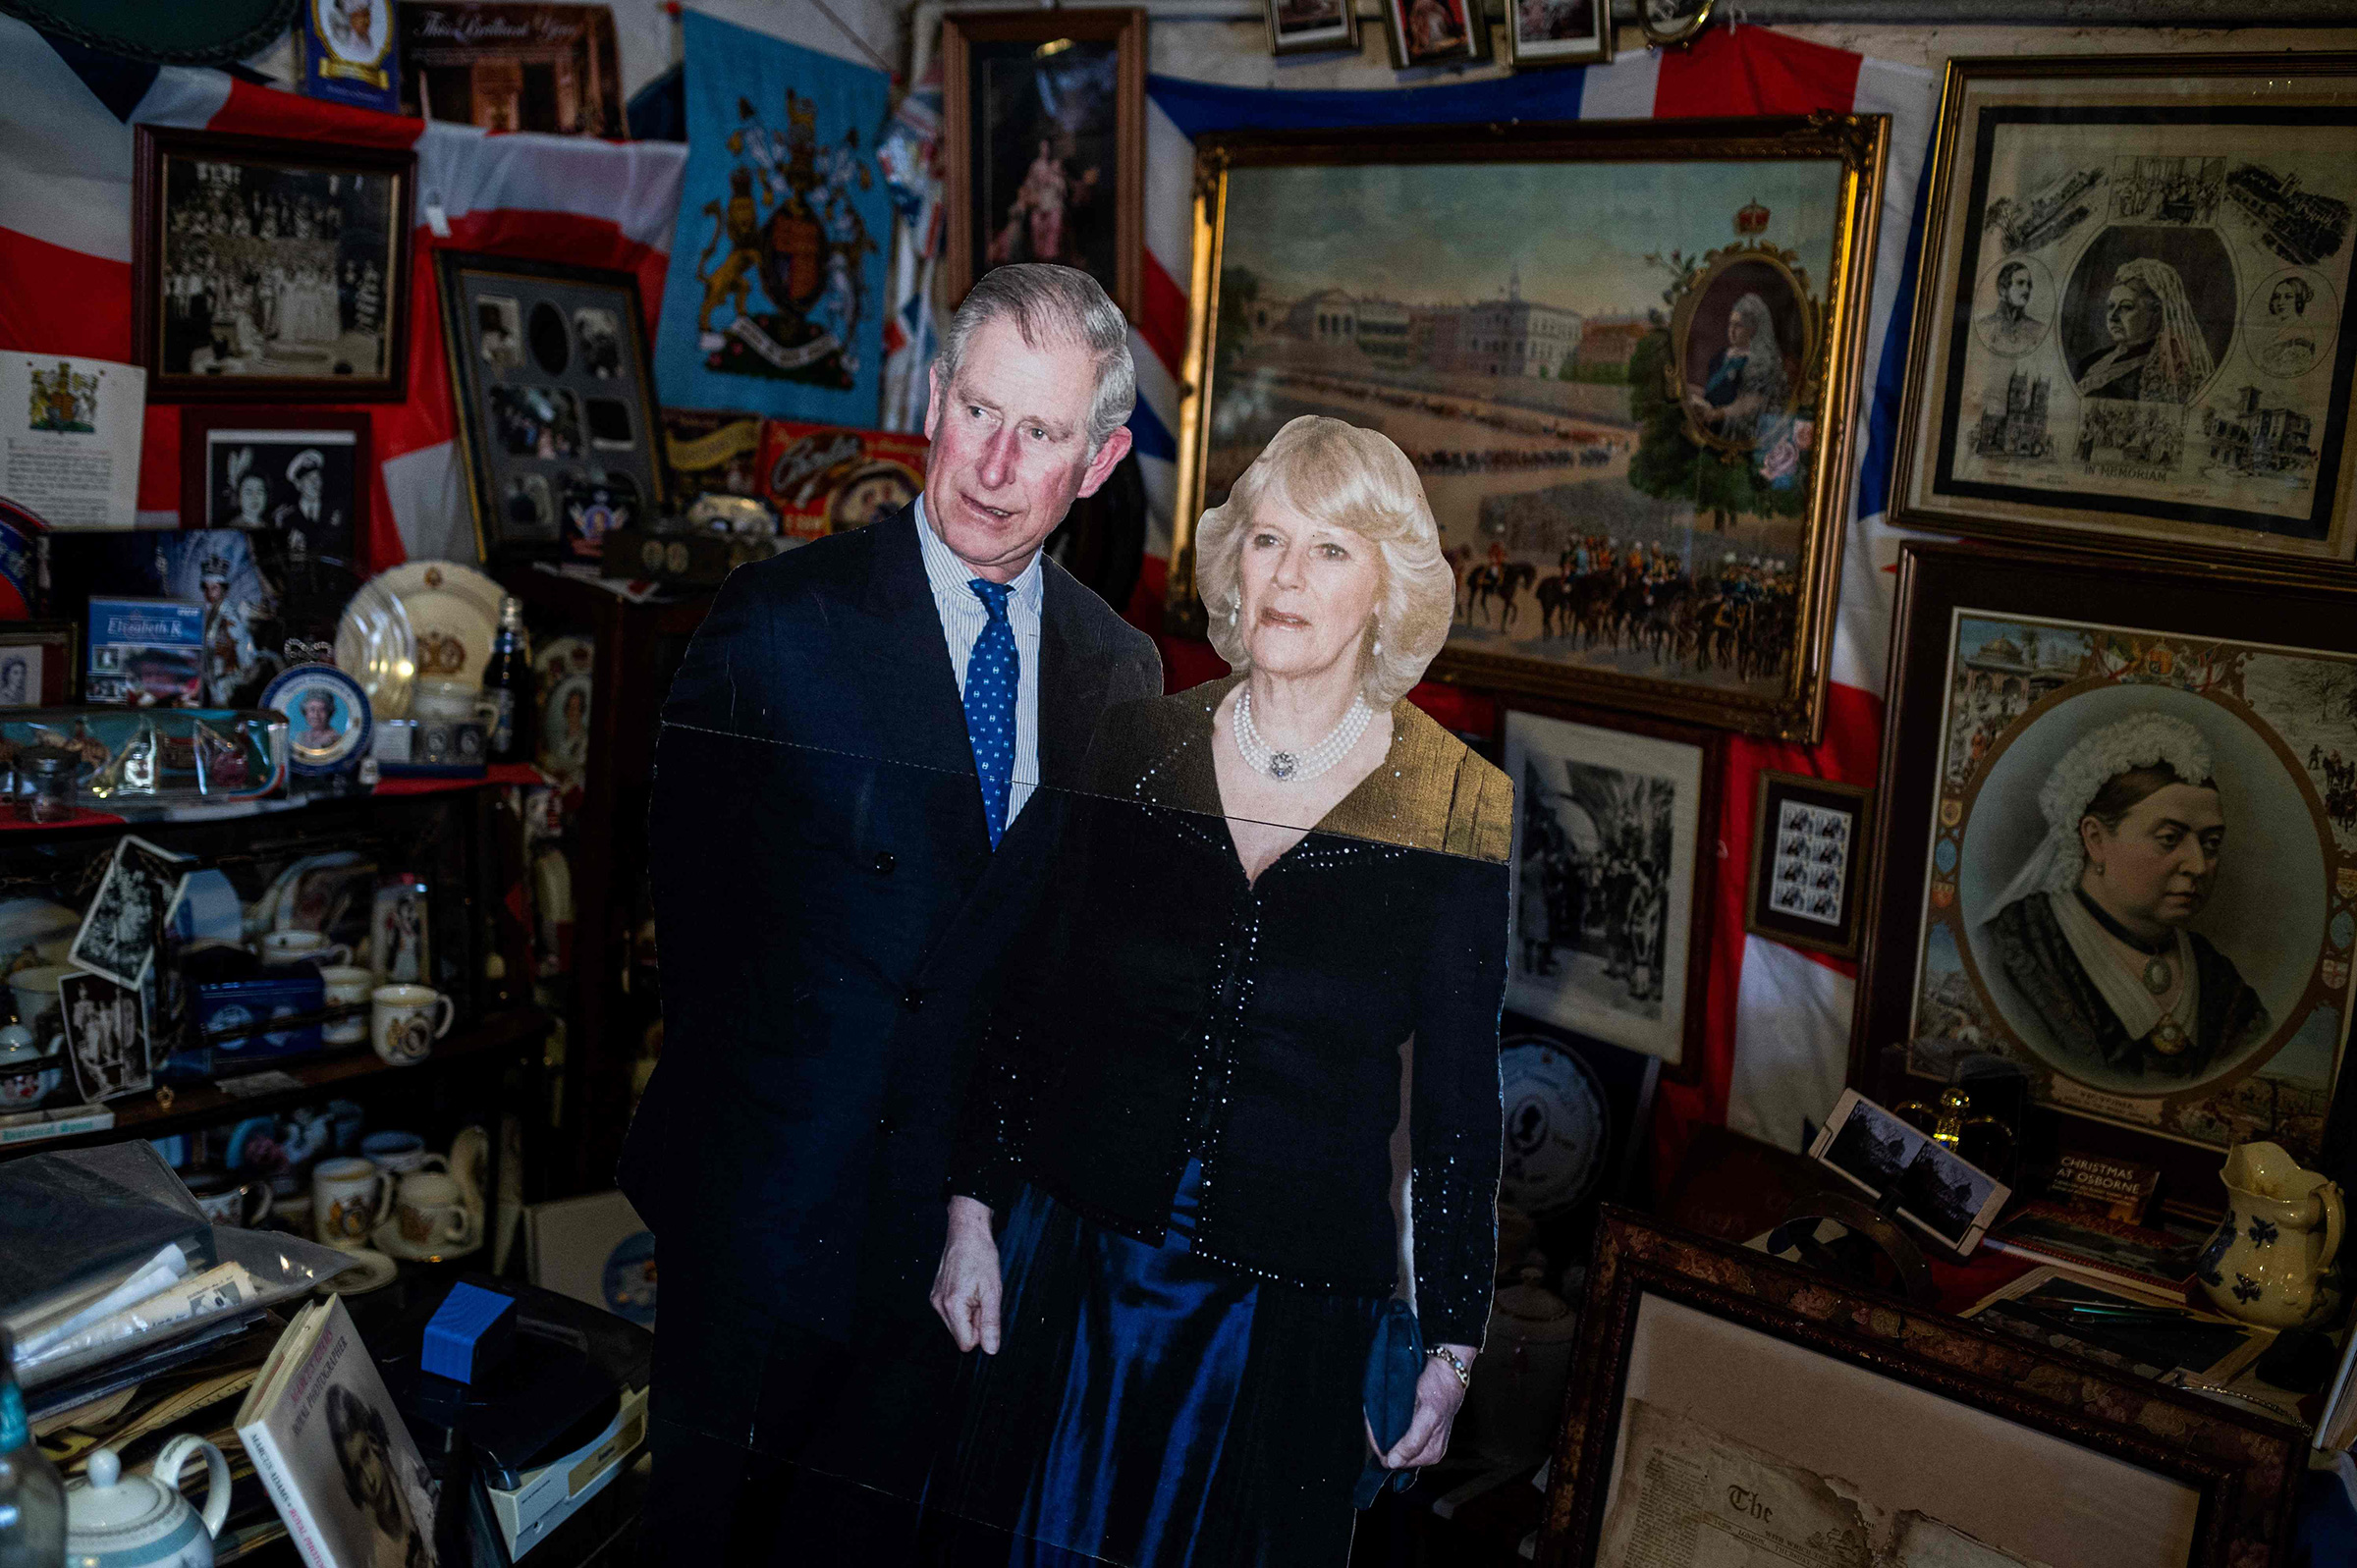 A life-size cardboard cut-out of King Charles III and Camilla, Queen Consort, is displayed among 13,283 pieces of royal memorabilia by ardent monarchist Anita Atkinson at her Weardale Farm near Bishop Auckland, northern England, on March 31 Is.  (Oli Scharf - AFP/Getty Images)